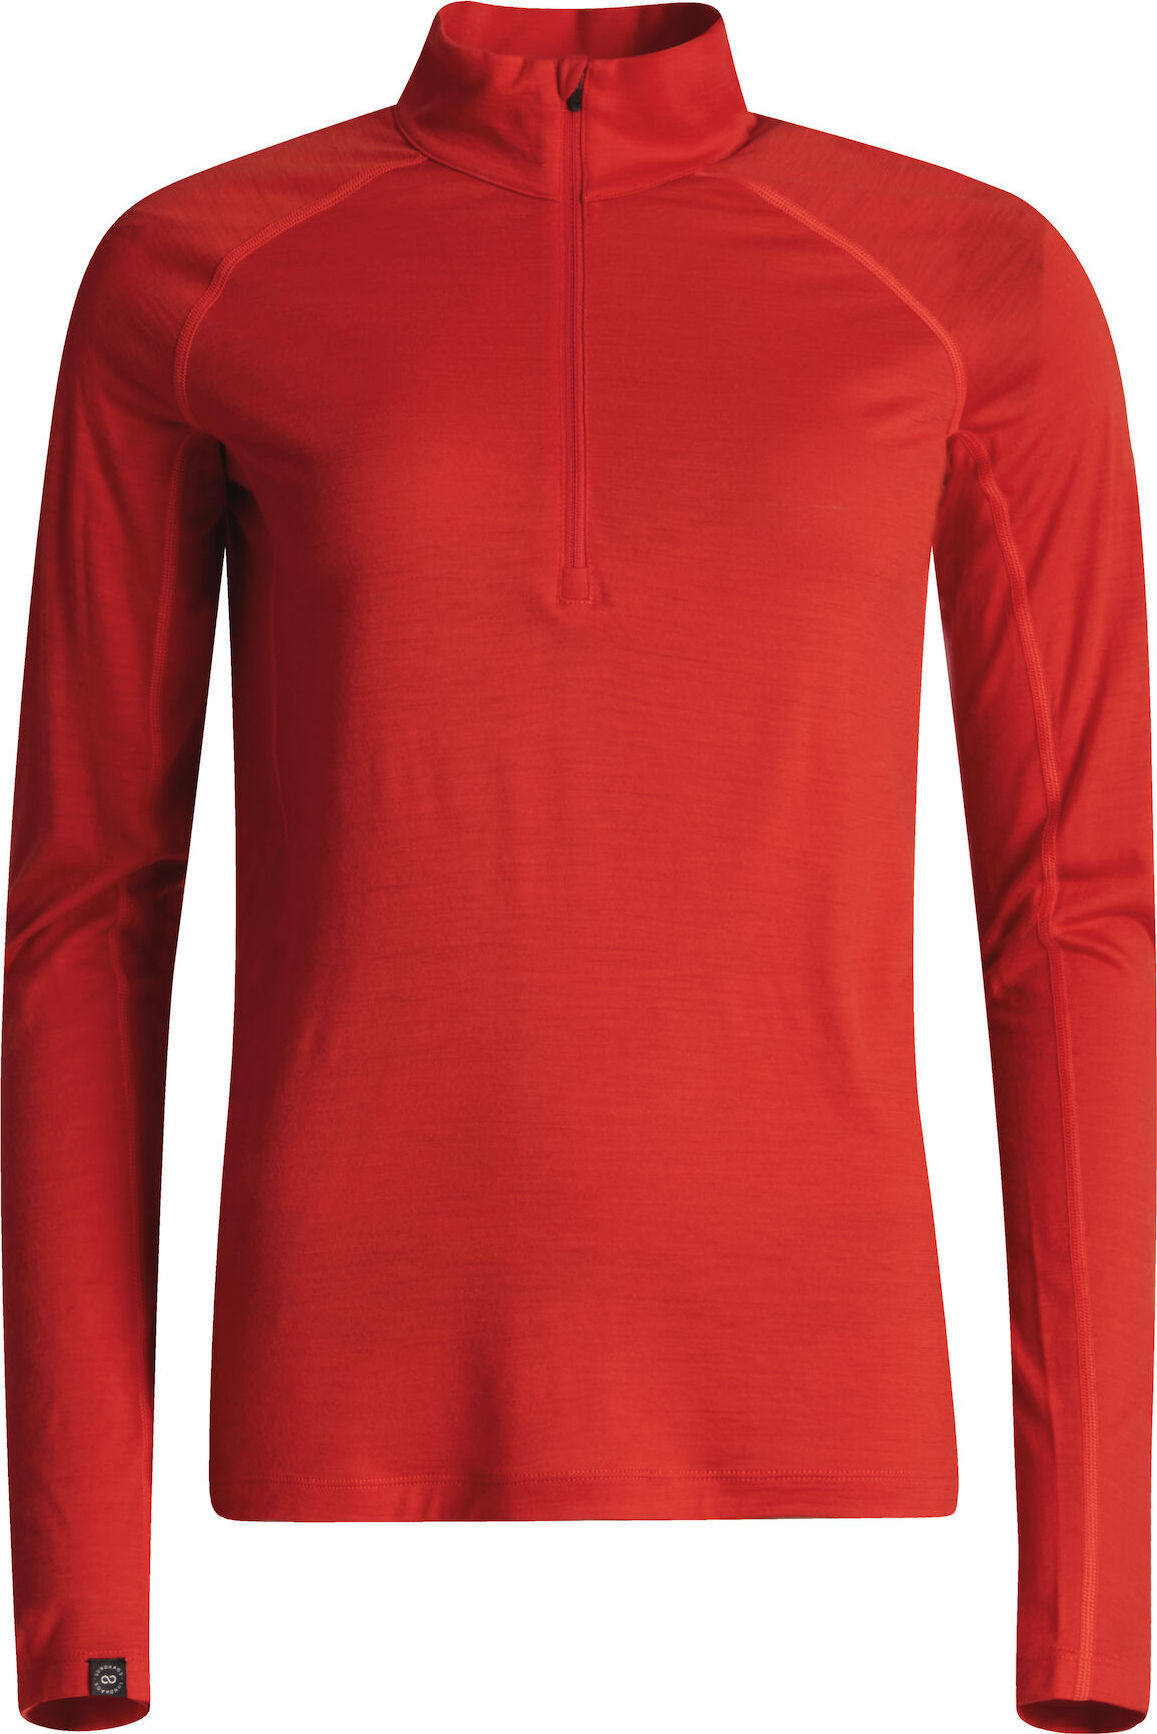 Lundhags Lundhags Women's Gimmer Merino Light 1/2 Zip Lively Red L, Lively Red